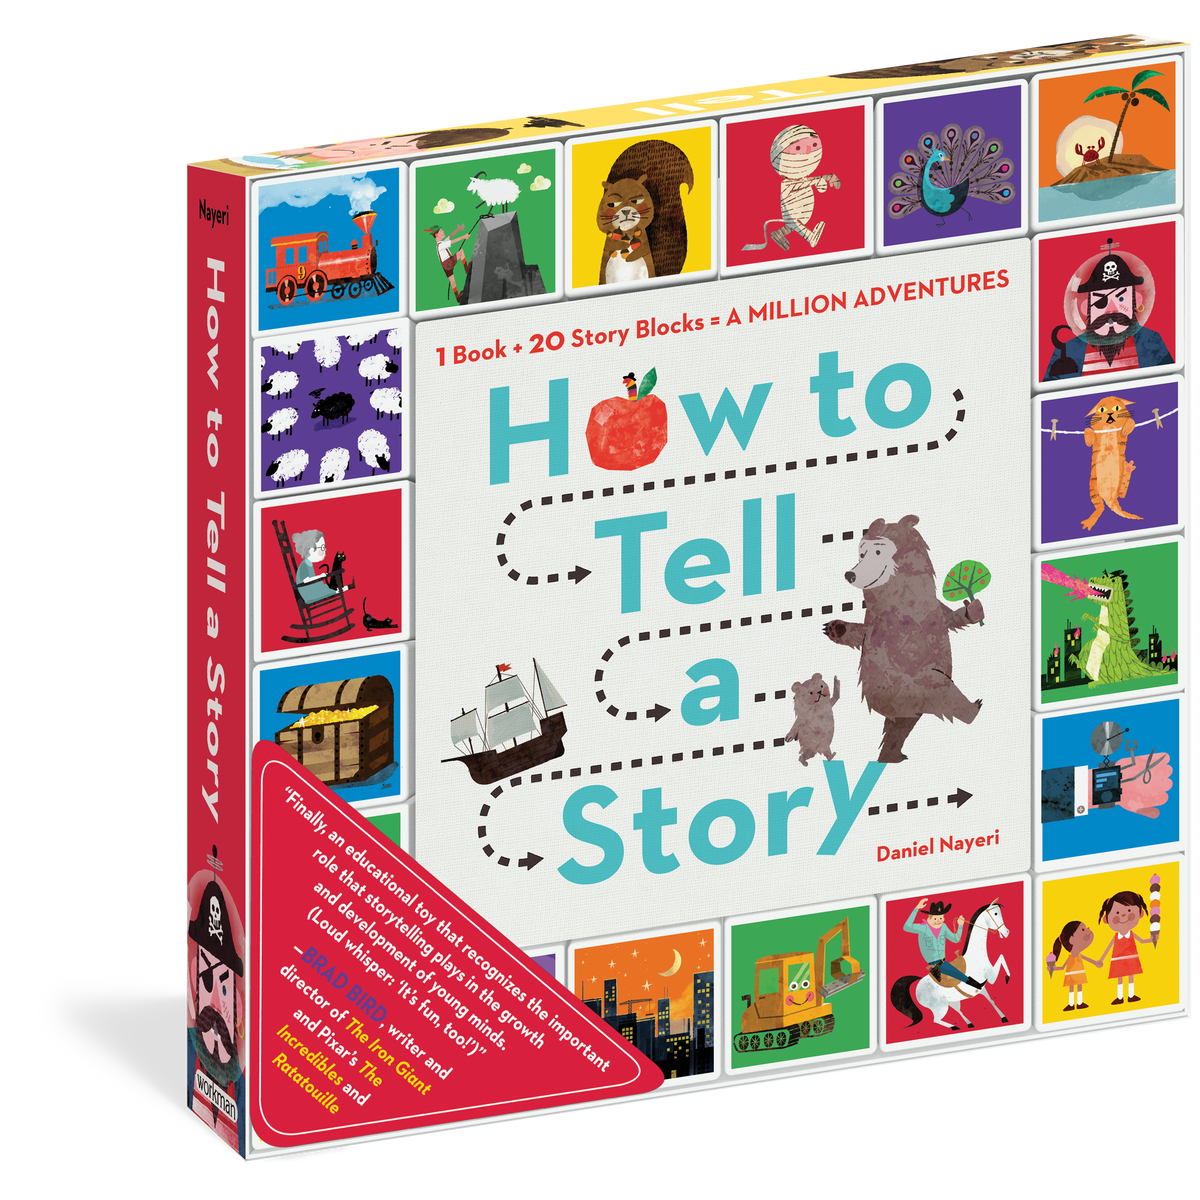 How To Tell A Story 1 Book + 20 Story Blocks = A Million Adventures